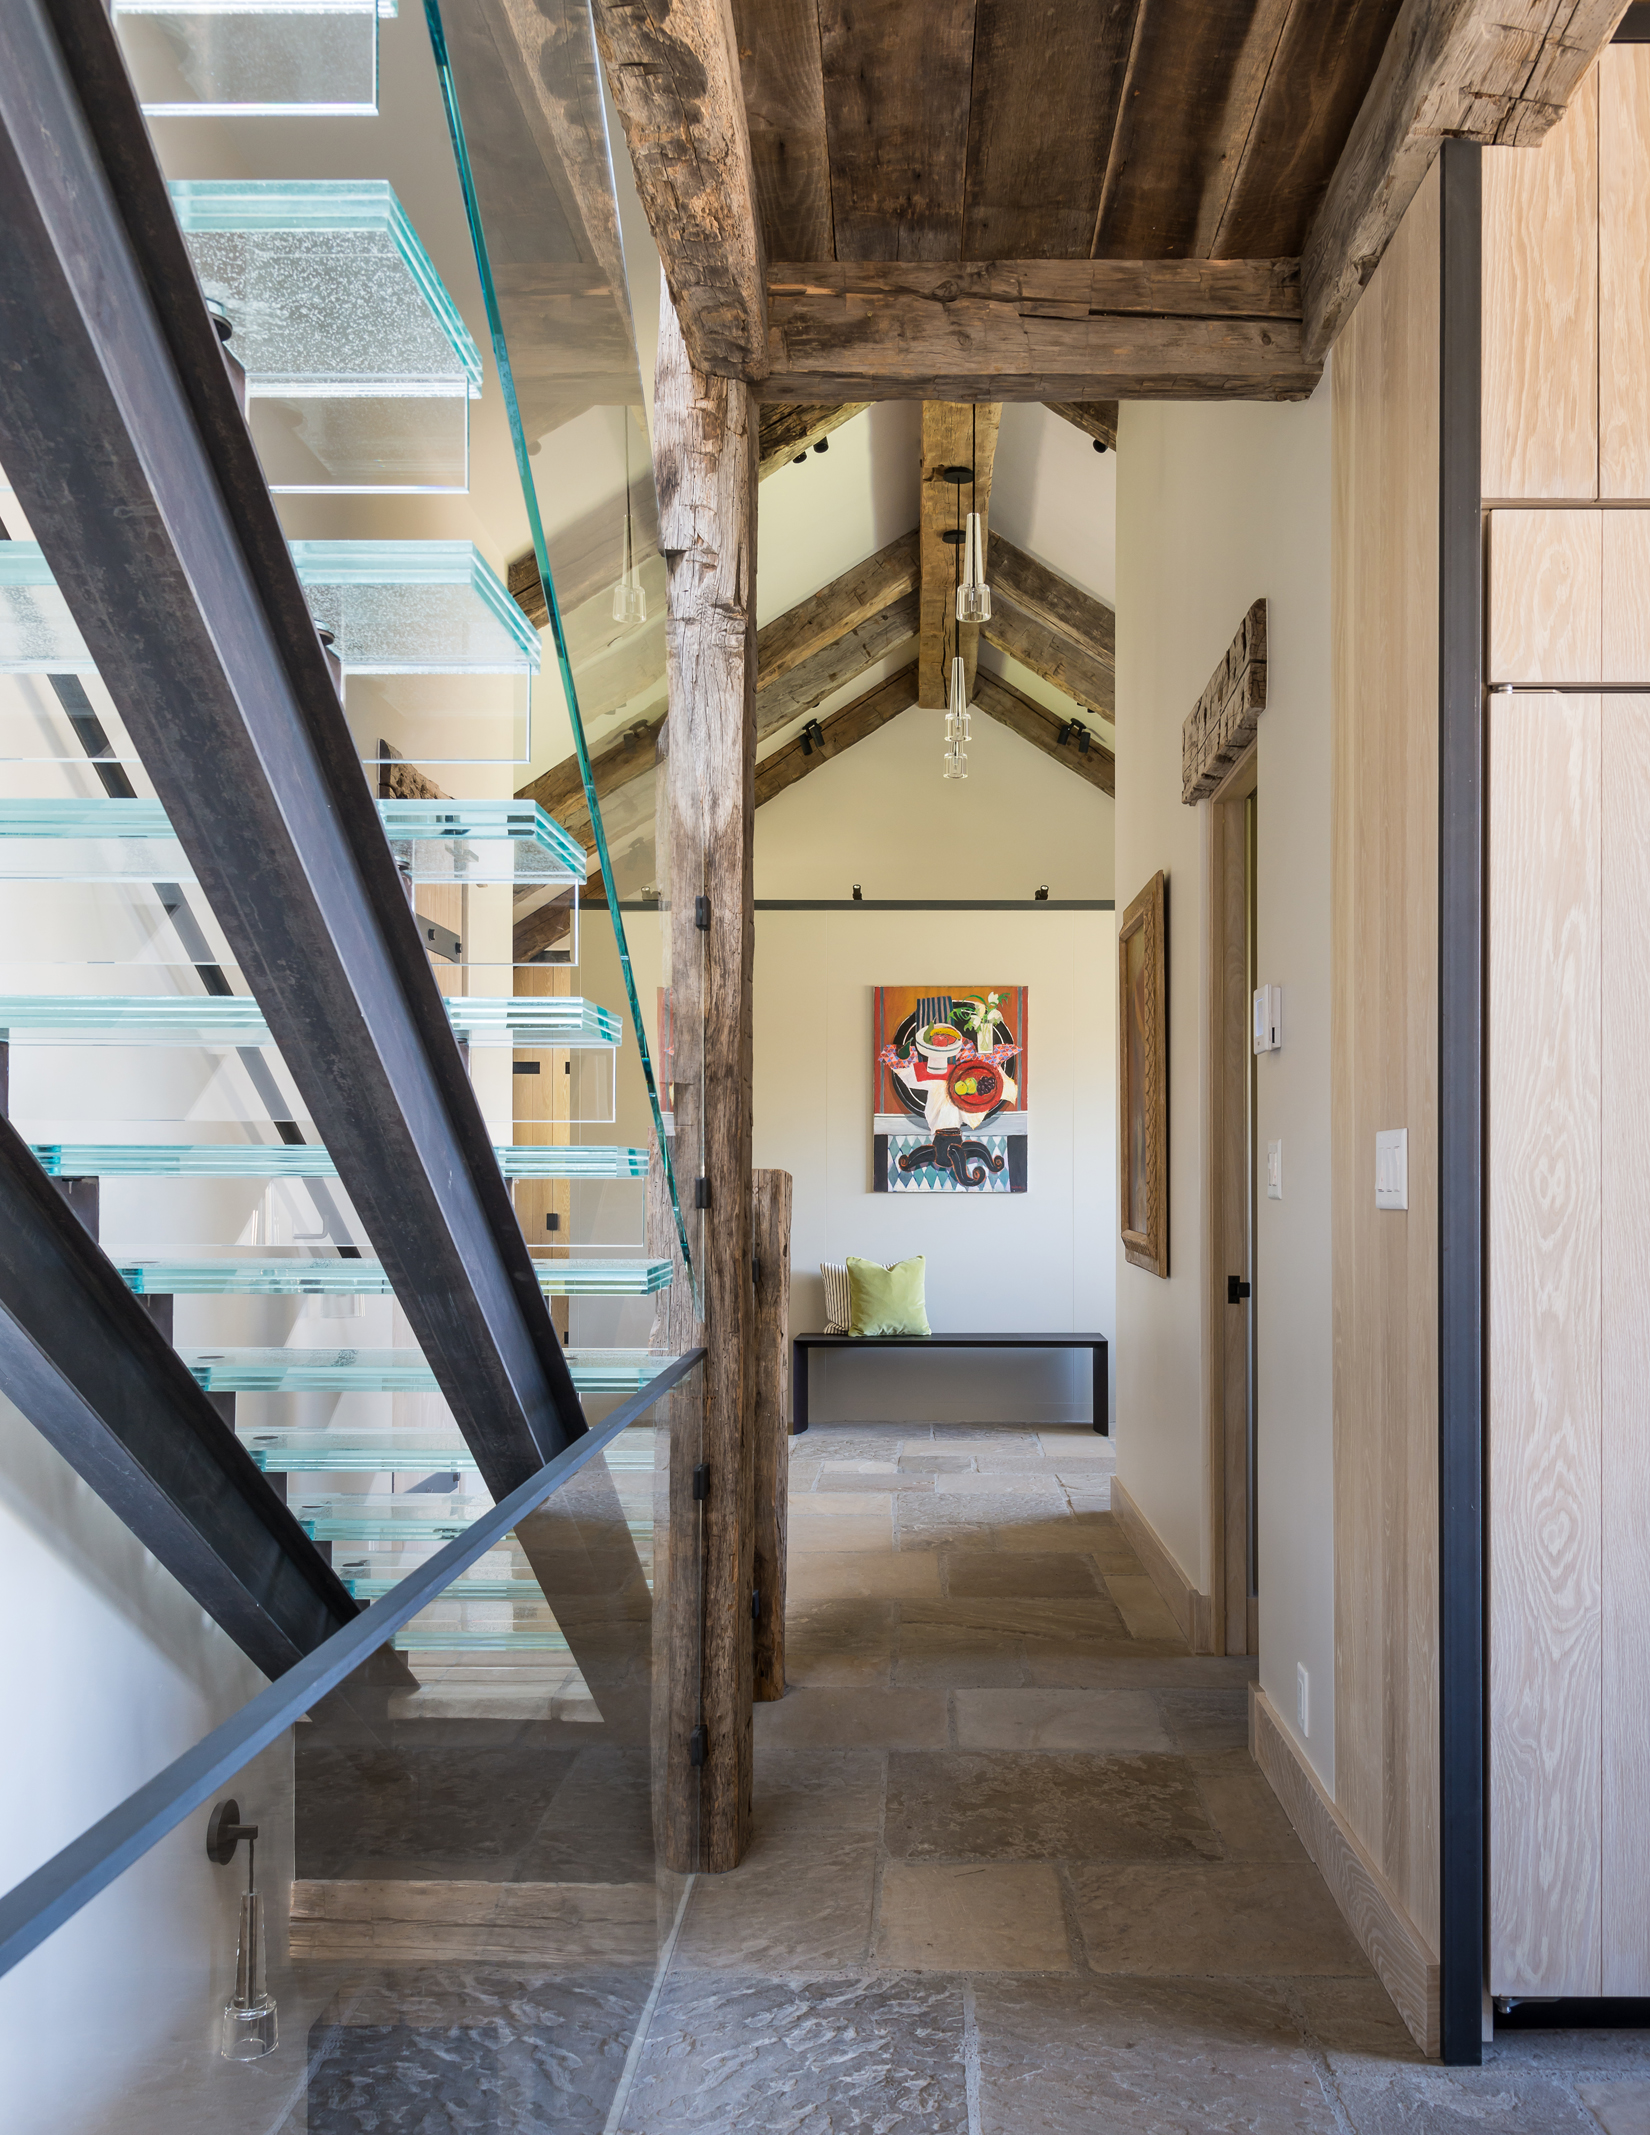 A floating glass stairway leading to the master bedroom gets regional grounding from weathered timbers in this Wyoming home by JLF Architects and Big-D Signature builders (photo by Audrey Hall).